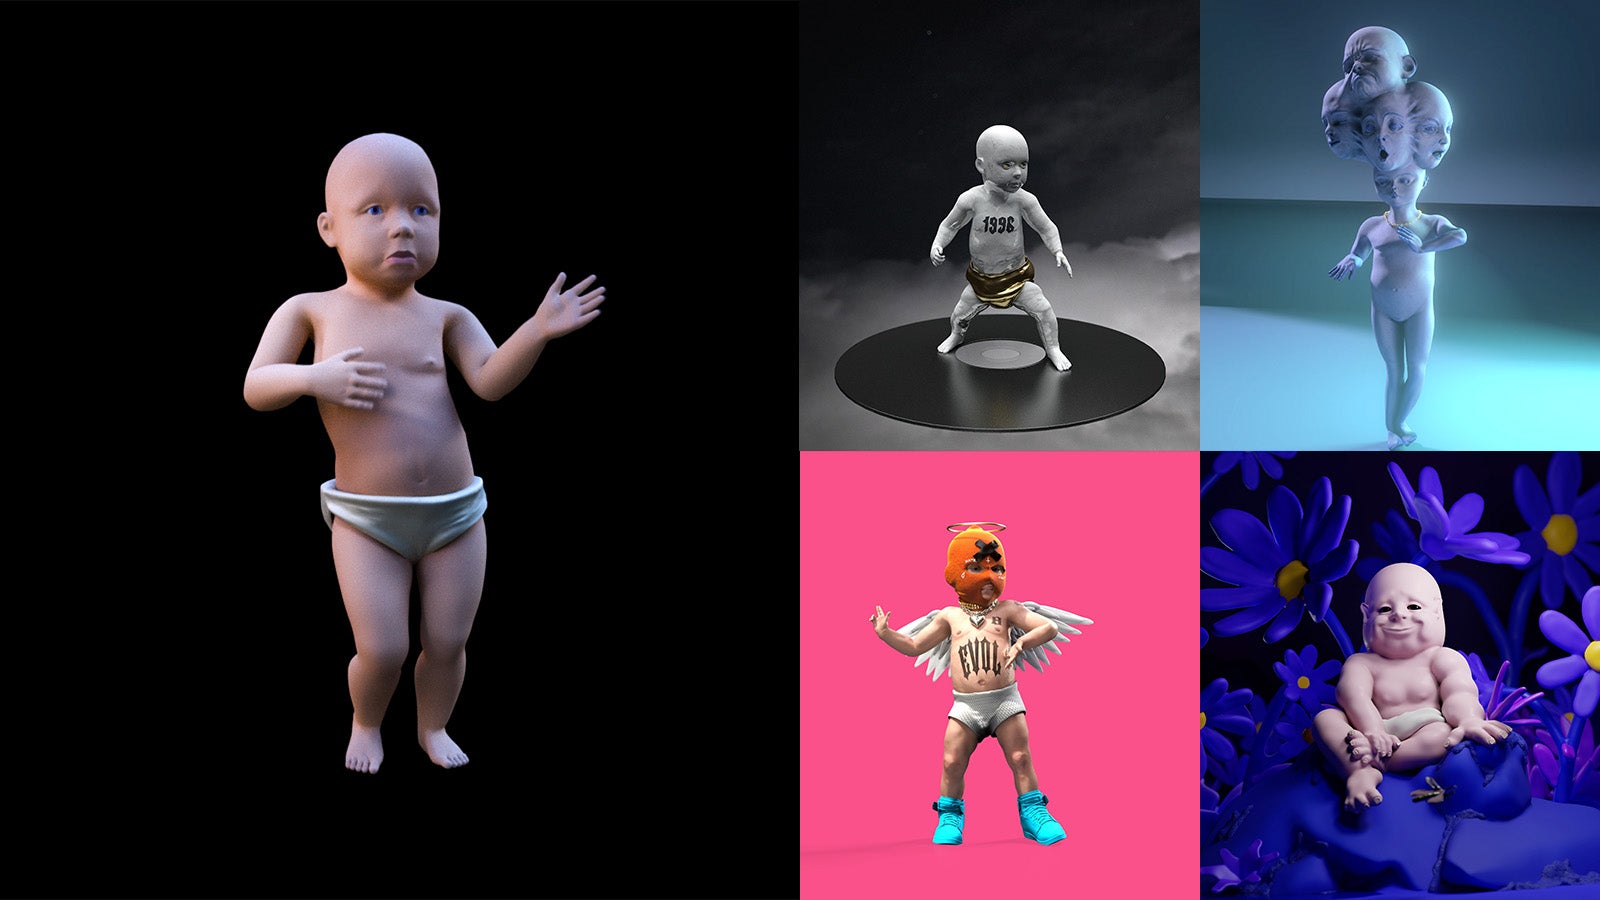 The Dancing Baby NFT is part of a larger collection featuring different versions of the meme. (Image: Autodesk)